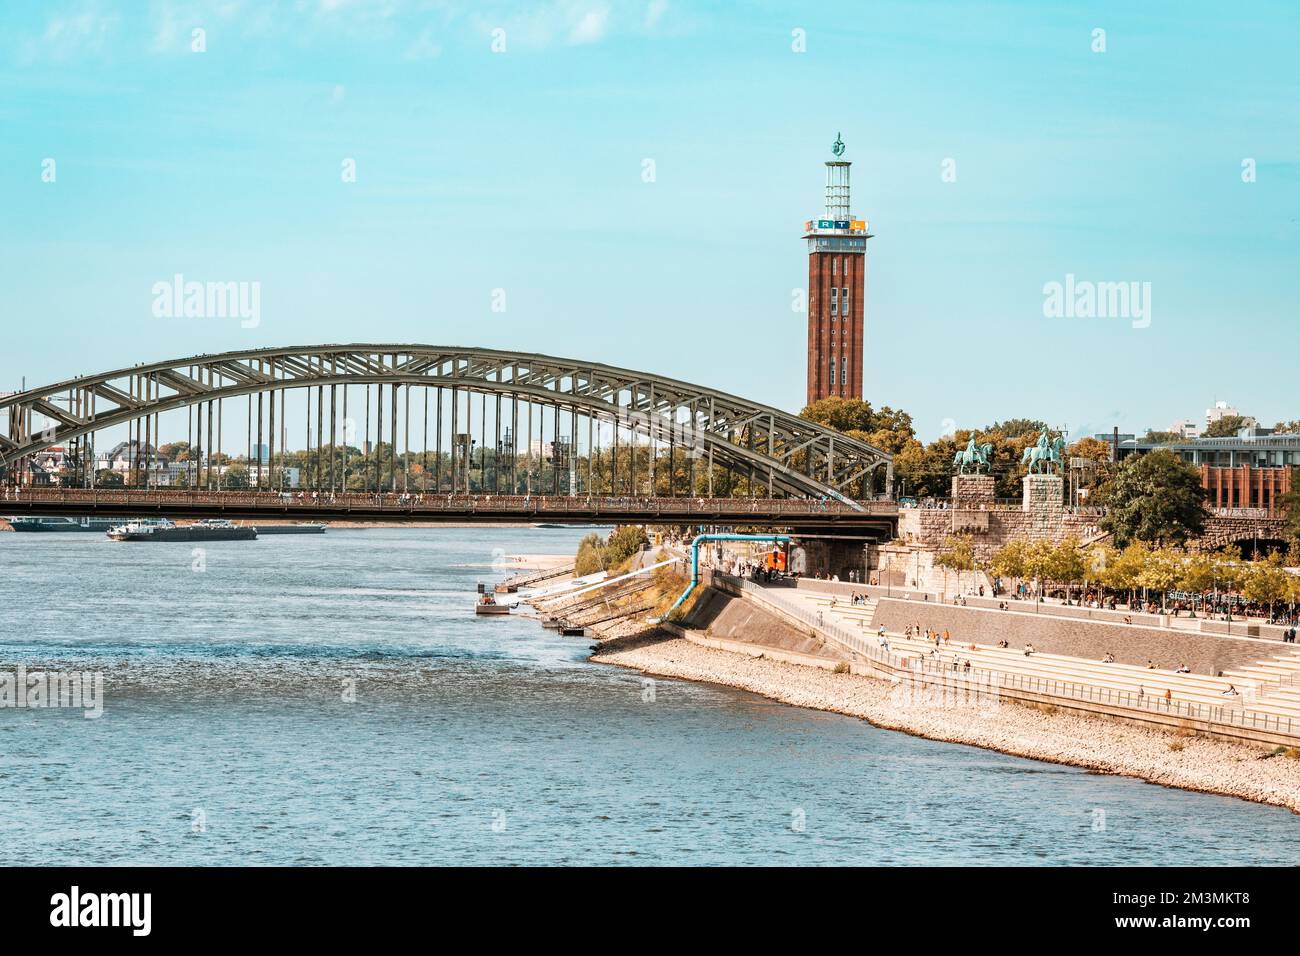 29 July 2022, Cologne, Germany: RTL tower and bridge over rhine river Stock Photo